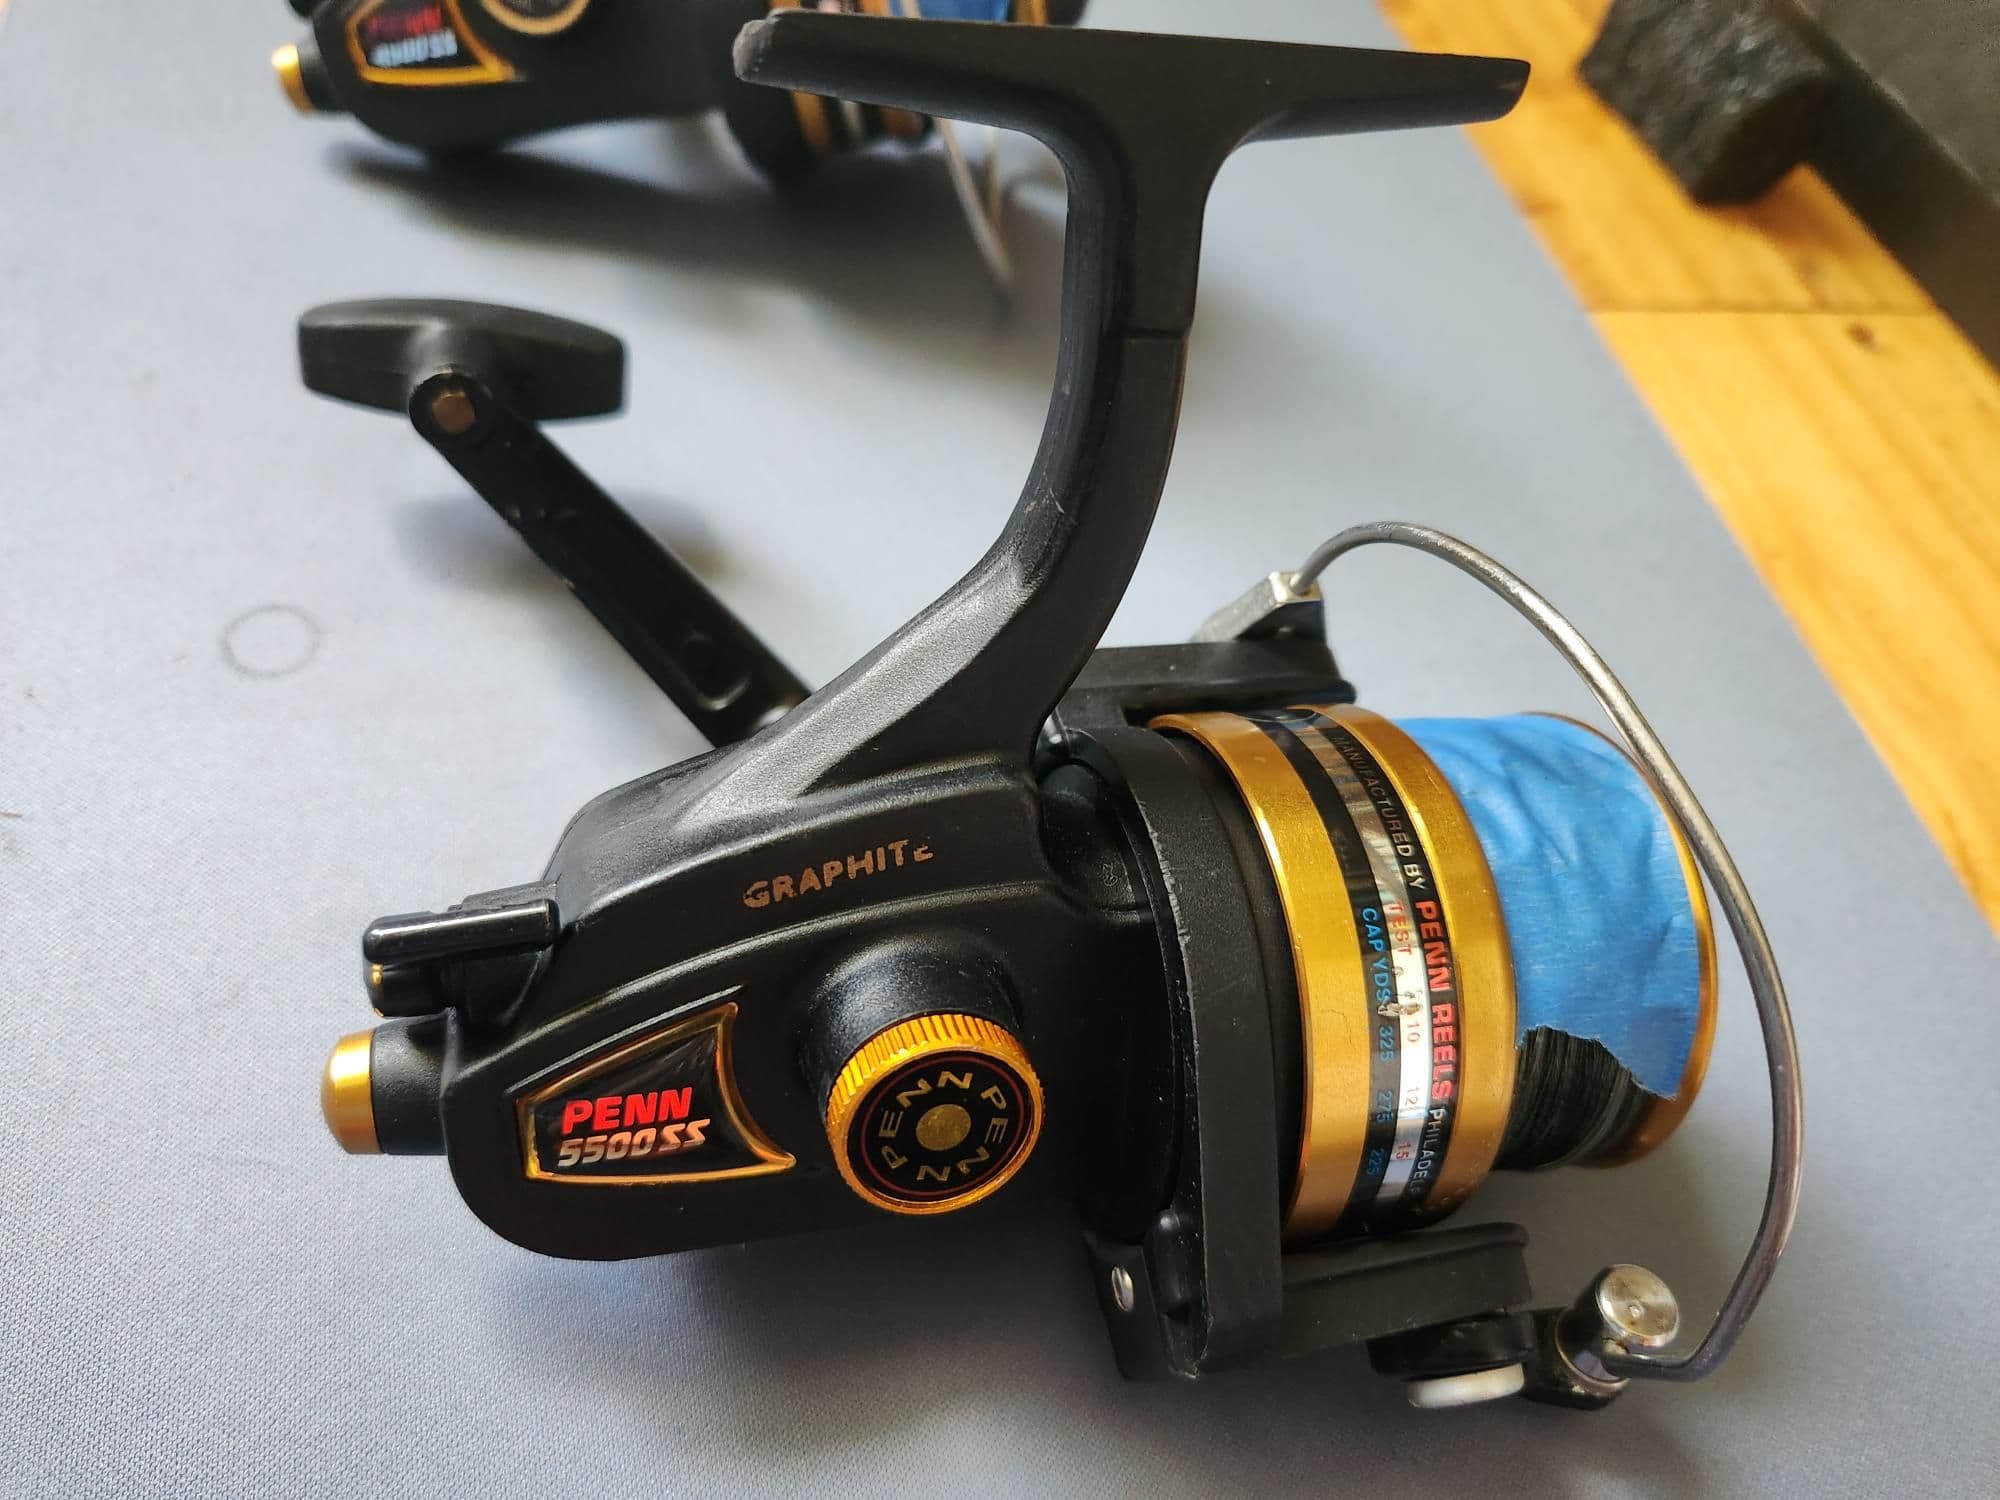 FS Penn 4500SS & 5500SS Graphite Reels - The Hull Truth - Boating